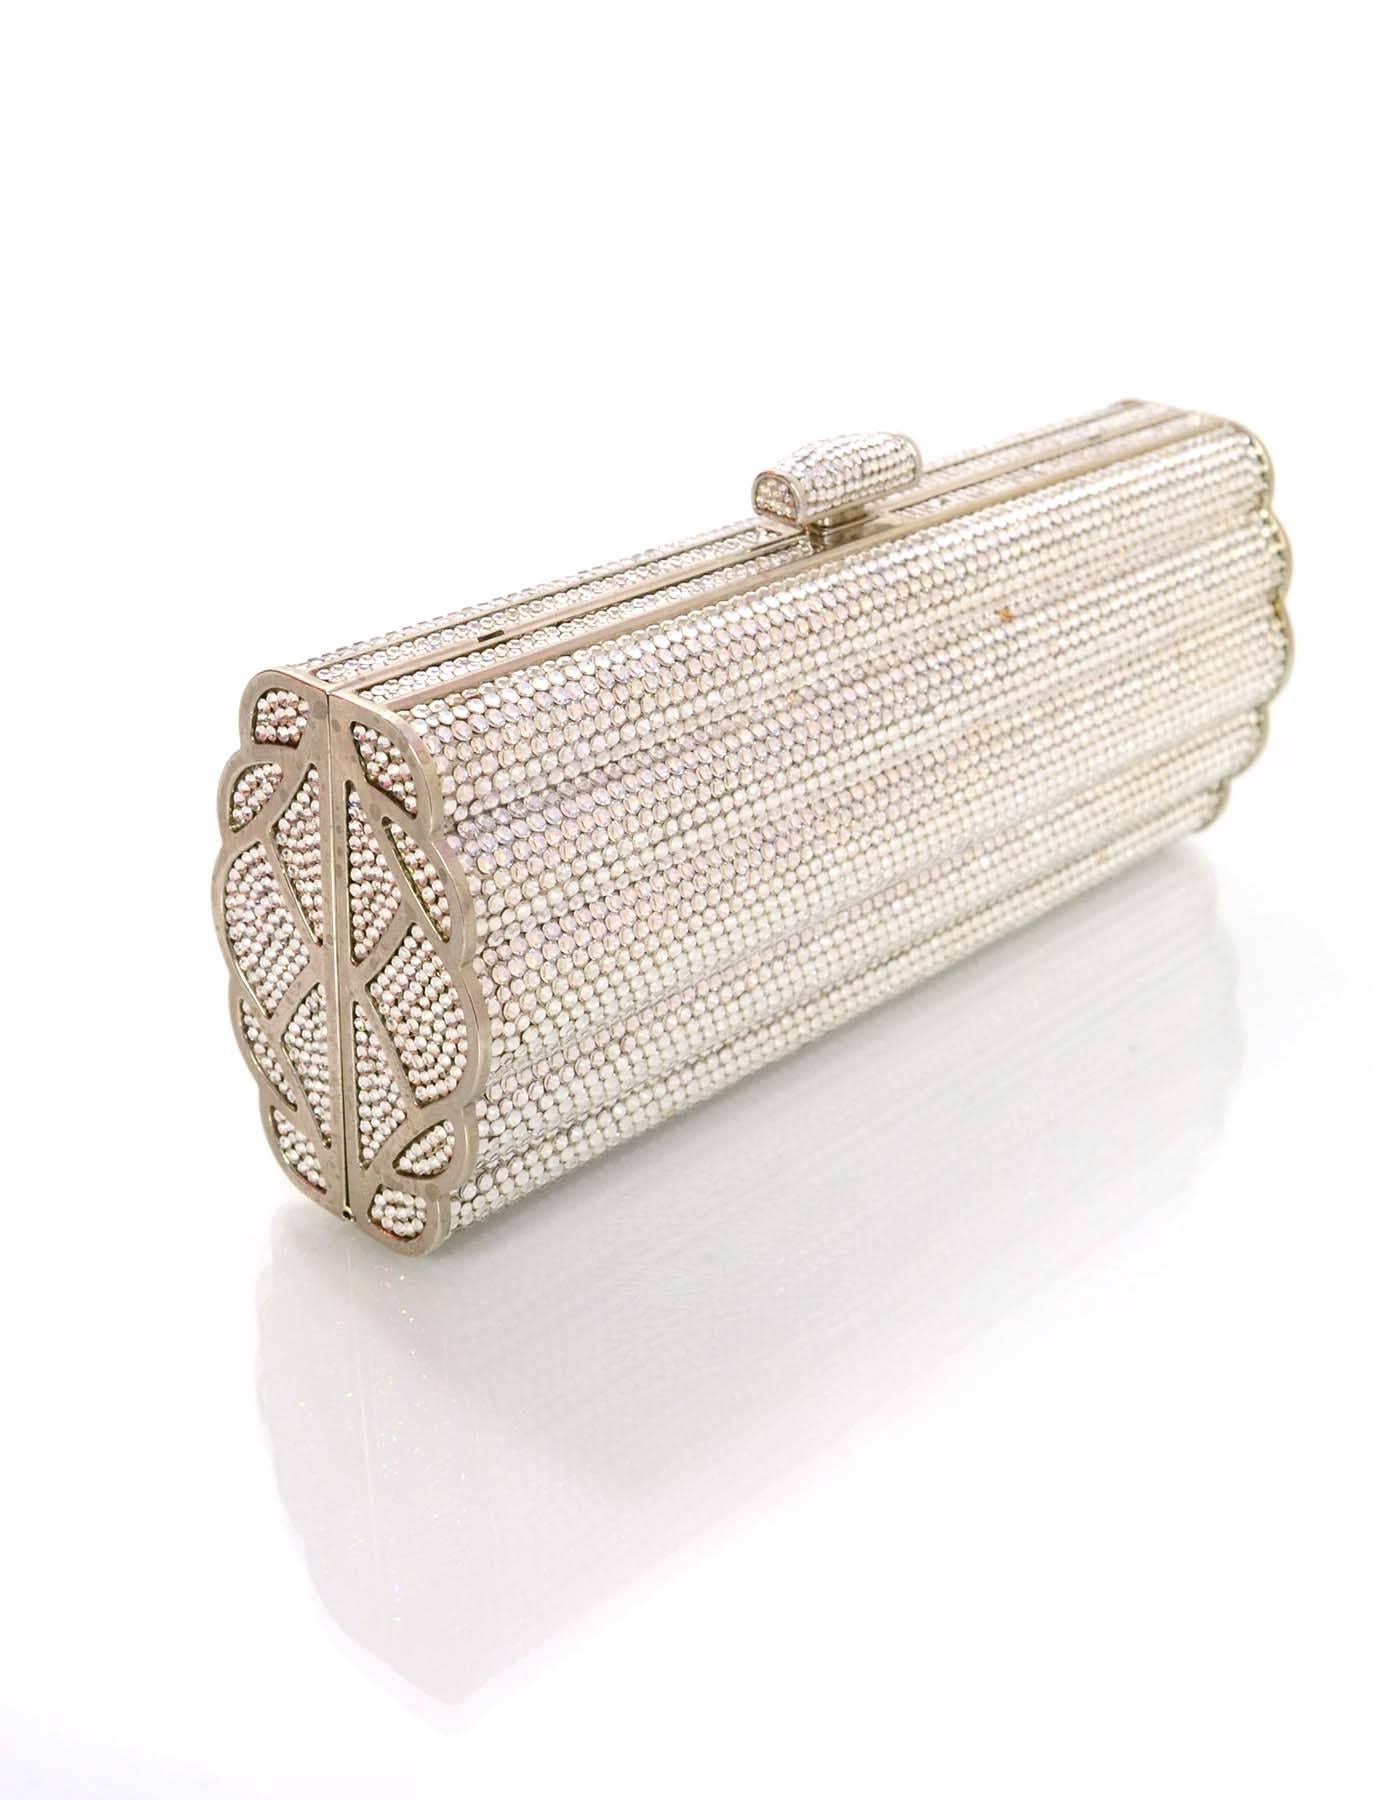 Beige Judith Leiber Pave Crystal Miniaudiere Clutch Bag w/ Shoulder Chain